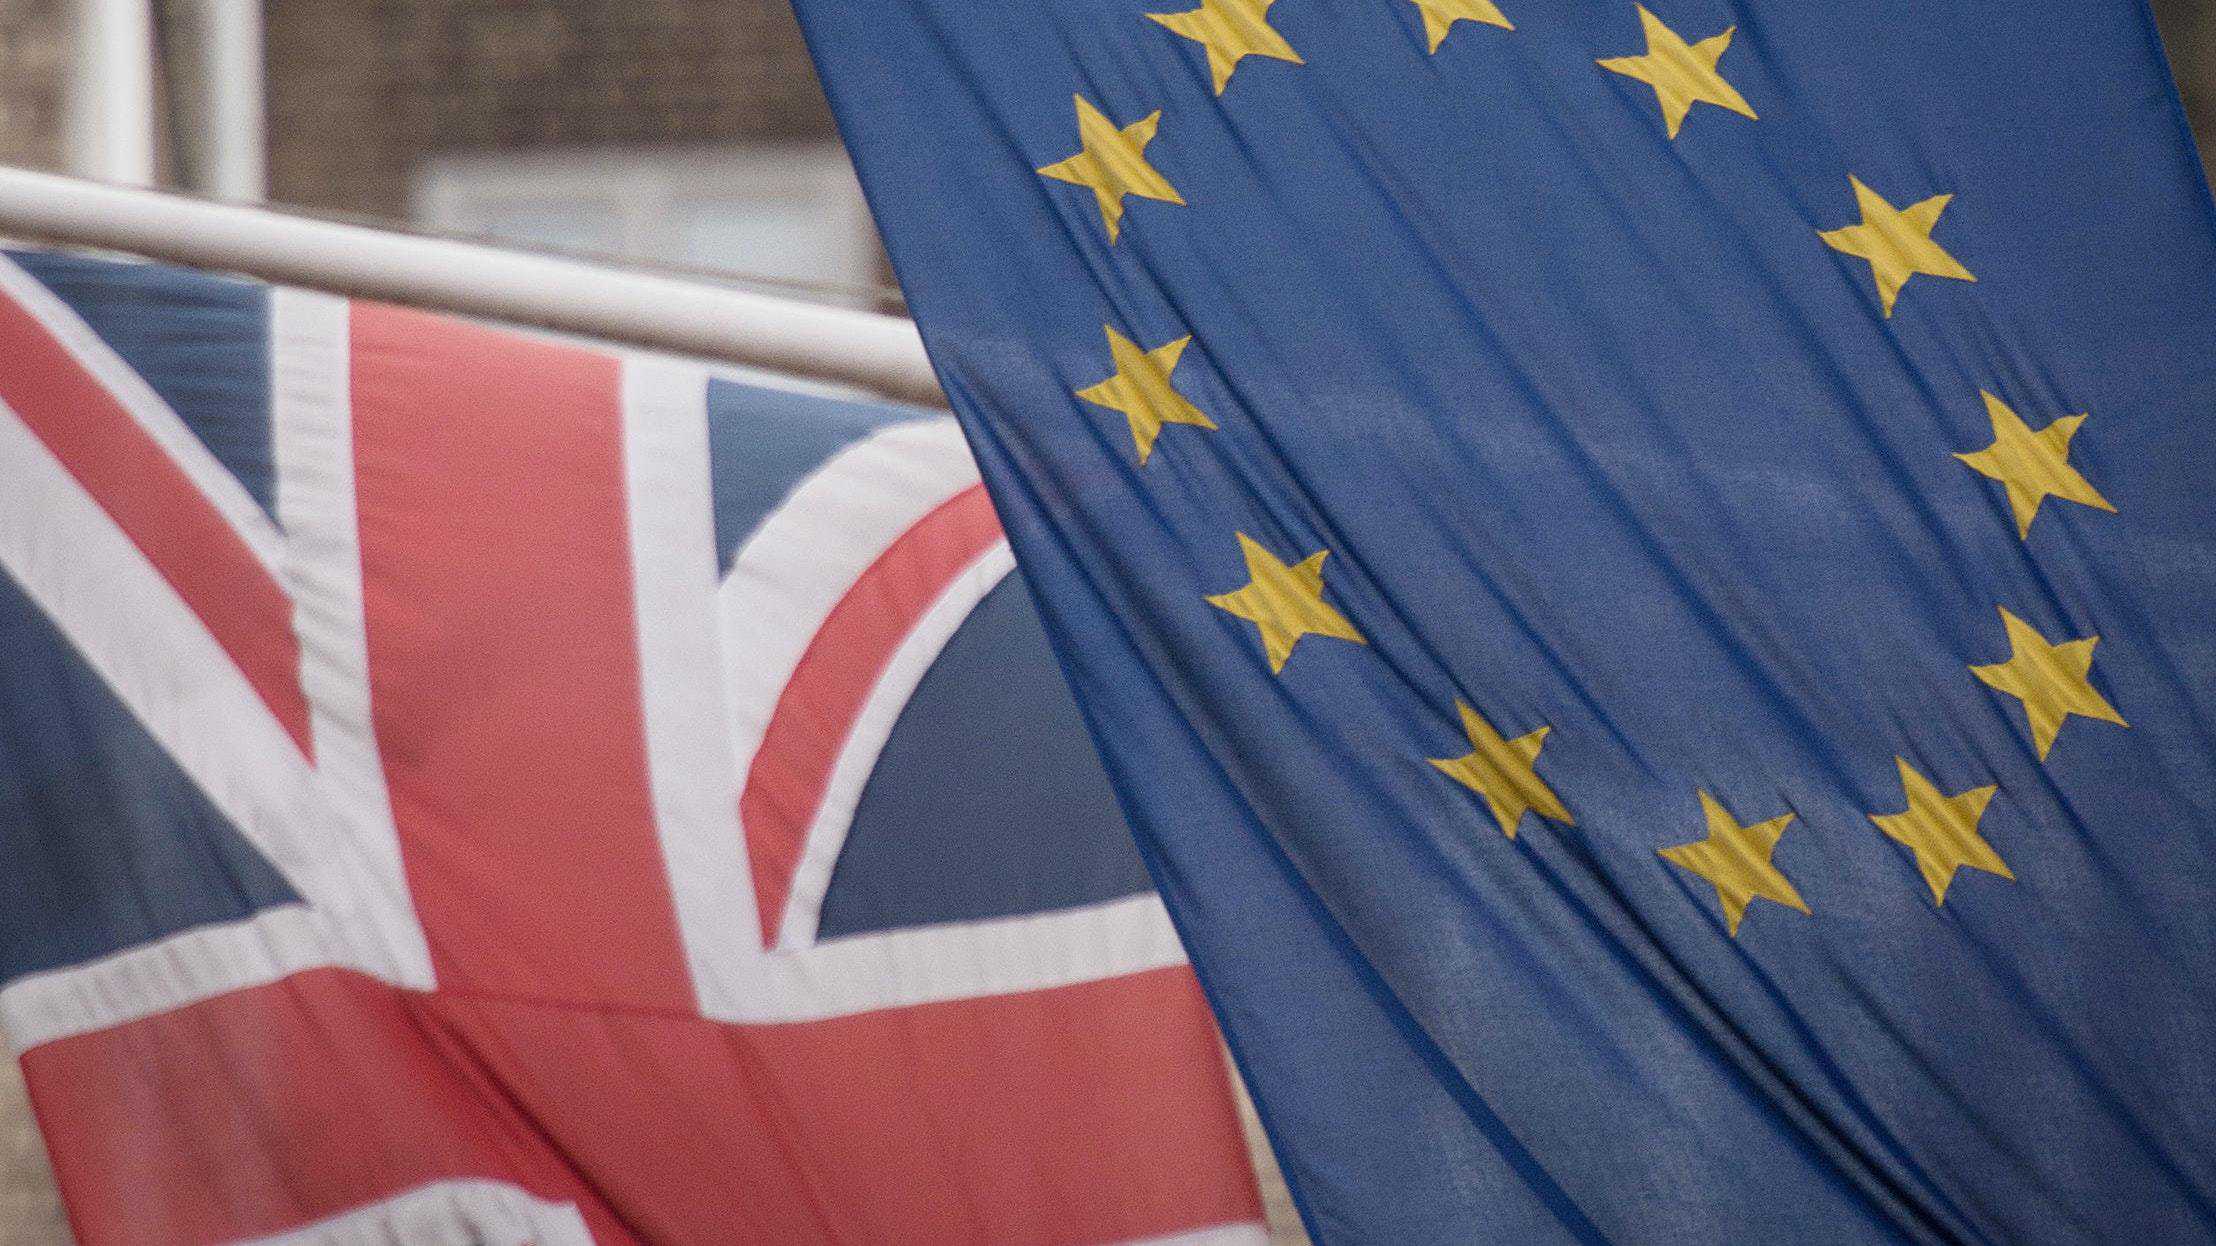 Support for Brexit is collapsing – poll